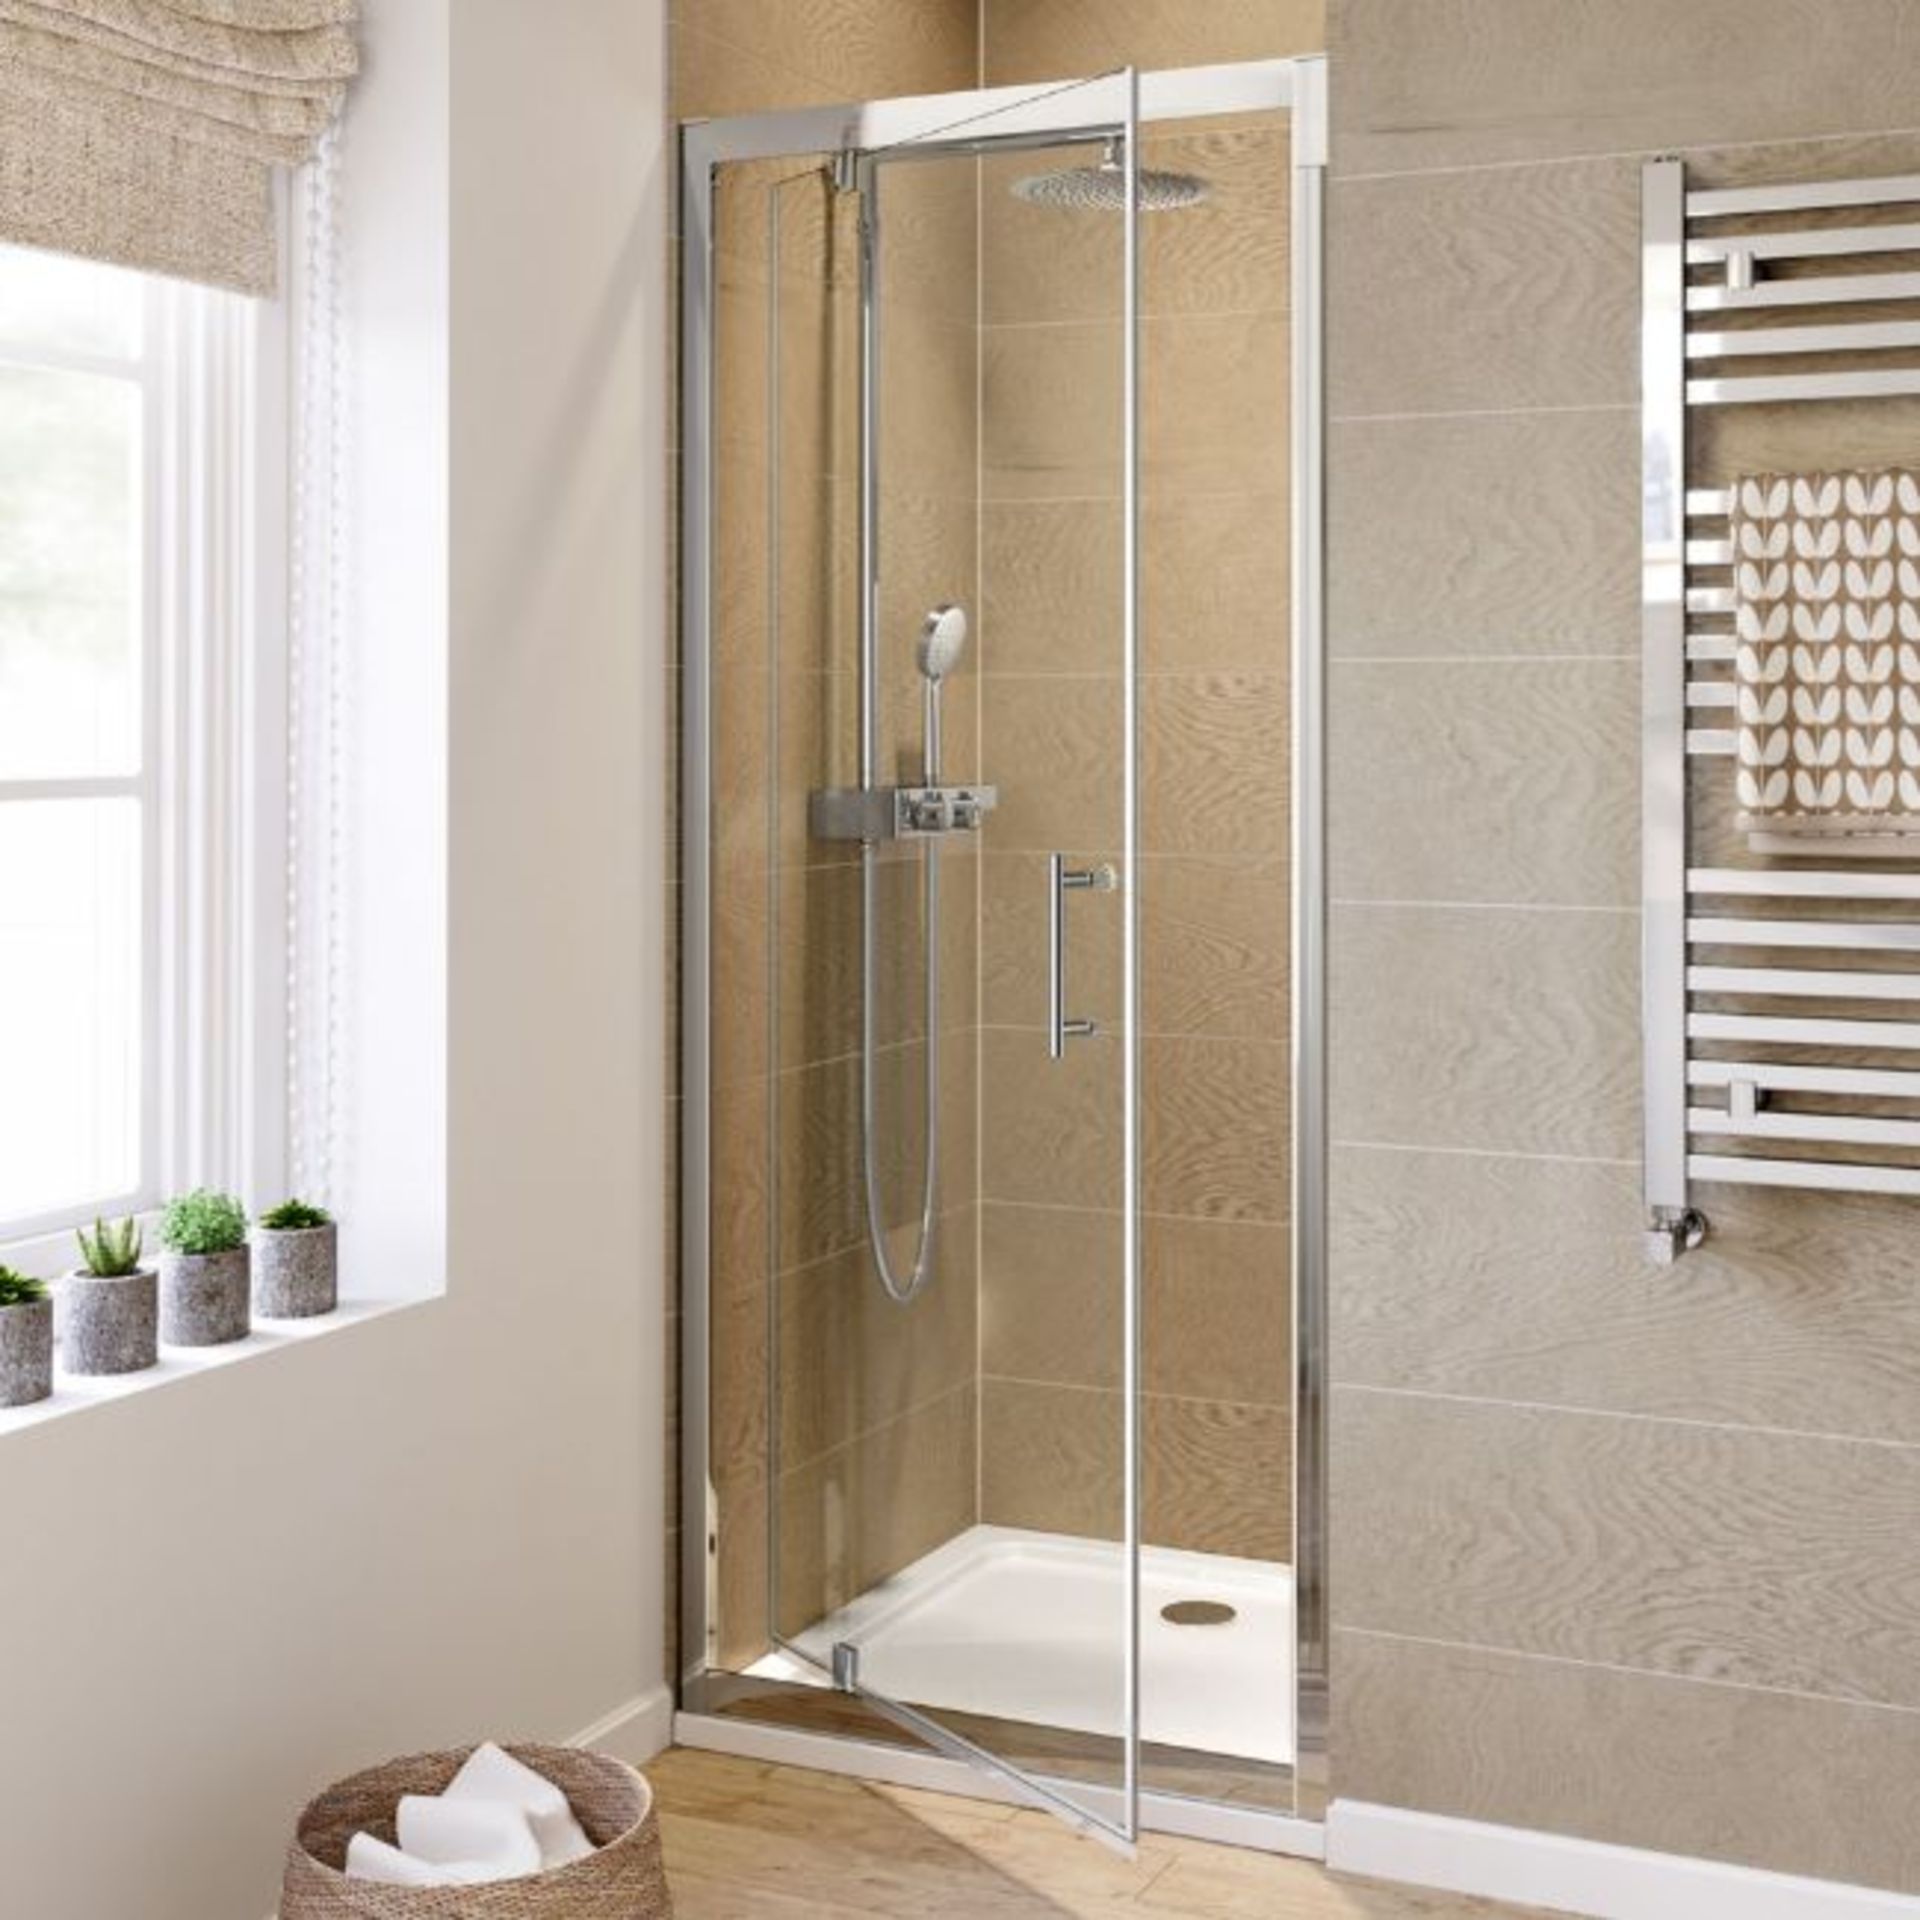 New Twyfords 800mm - 6mm Elements Pivot Shower Door. RRP £299.99. Of4100Cp. 6mm Safety Glass F...